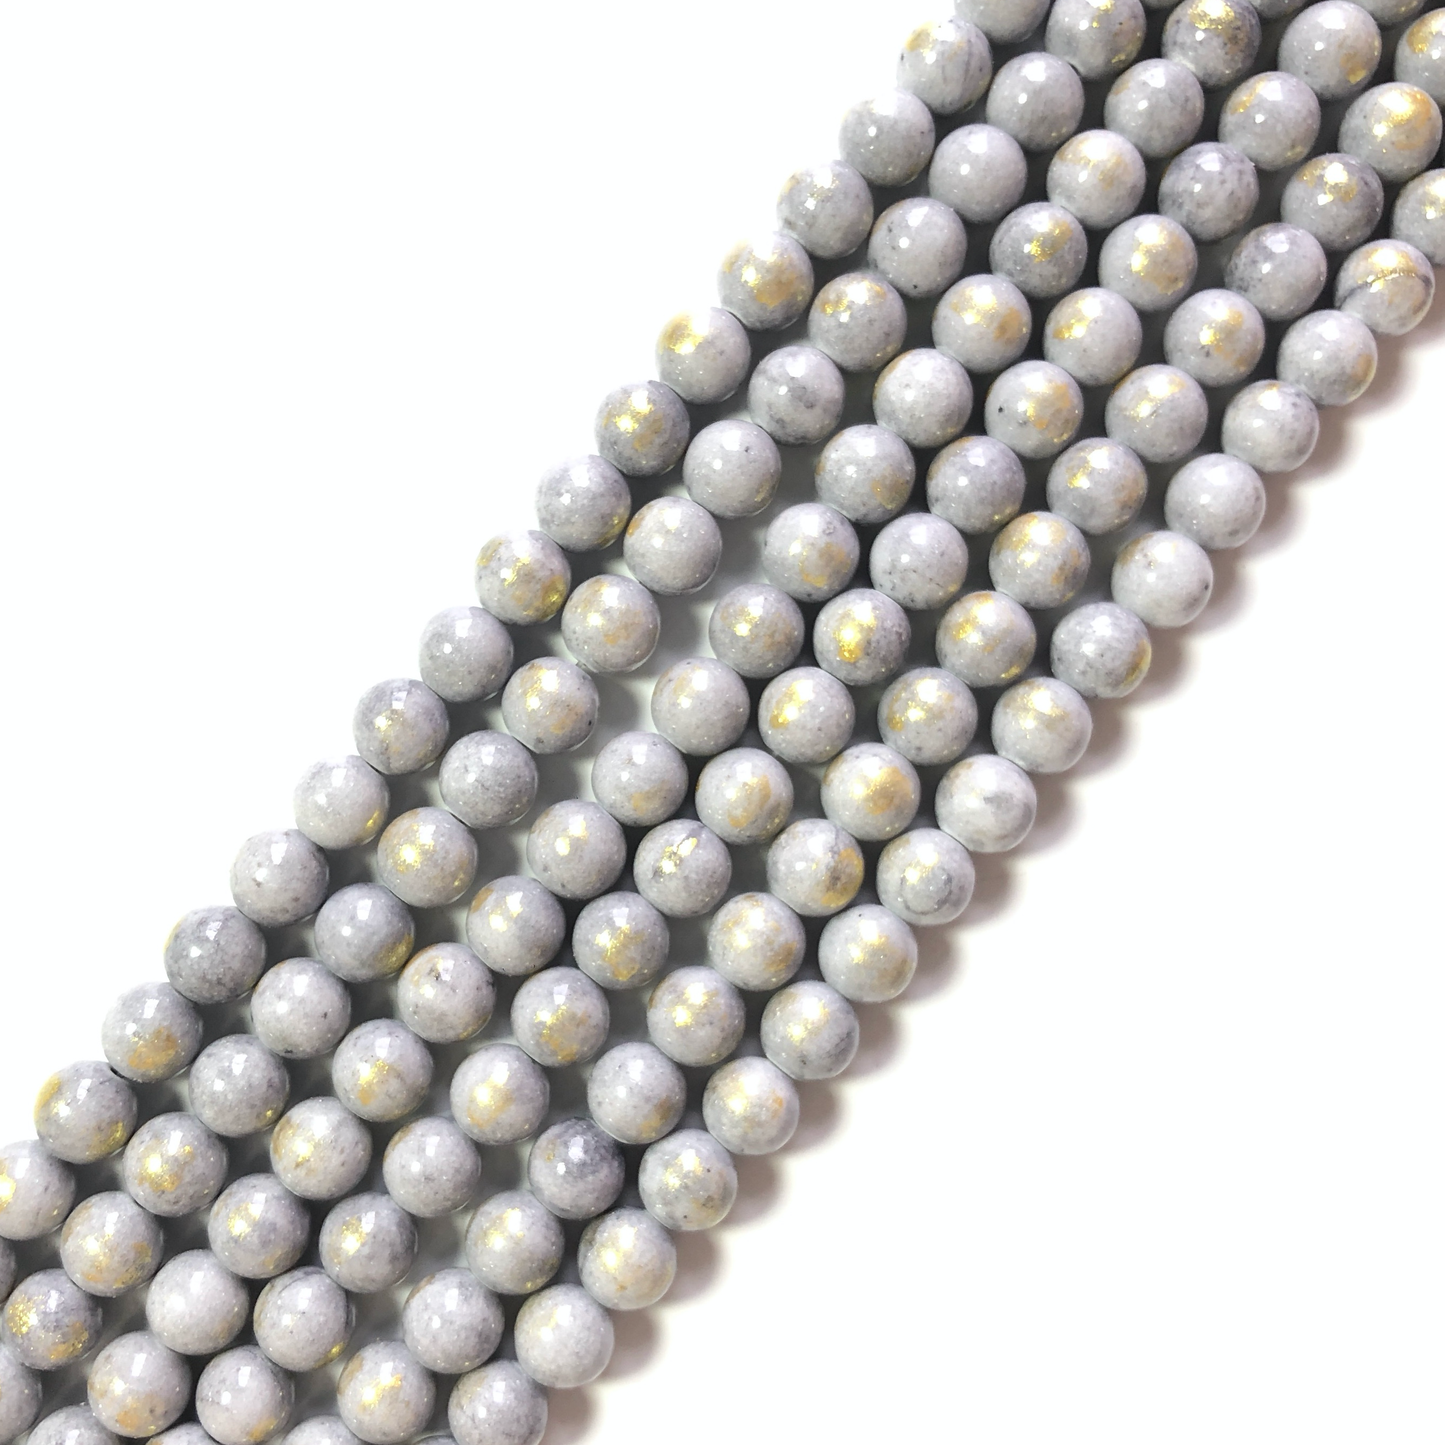 2 Strands/lot 8mm, 10mm Gray Gold Plated Jade Round Stone Beads Stone Beads 8mm Stone Beads Gold Plated Jade Beads Round Jade Beads Charms Beads Beyond